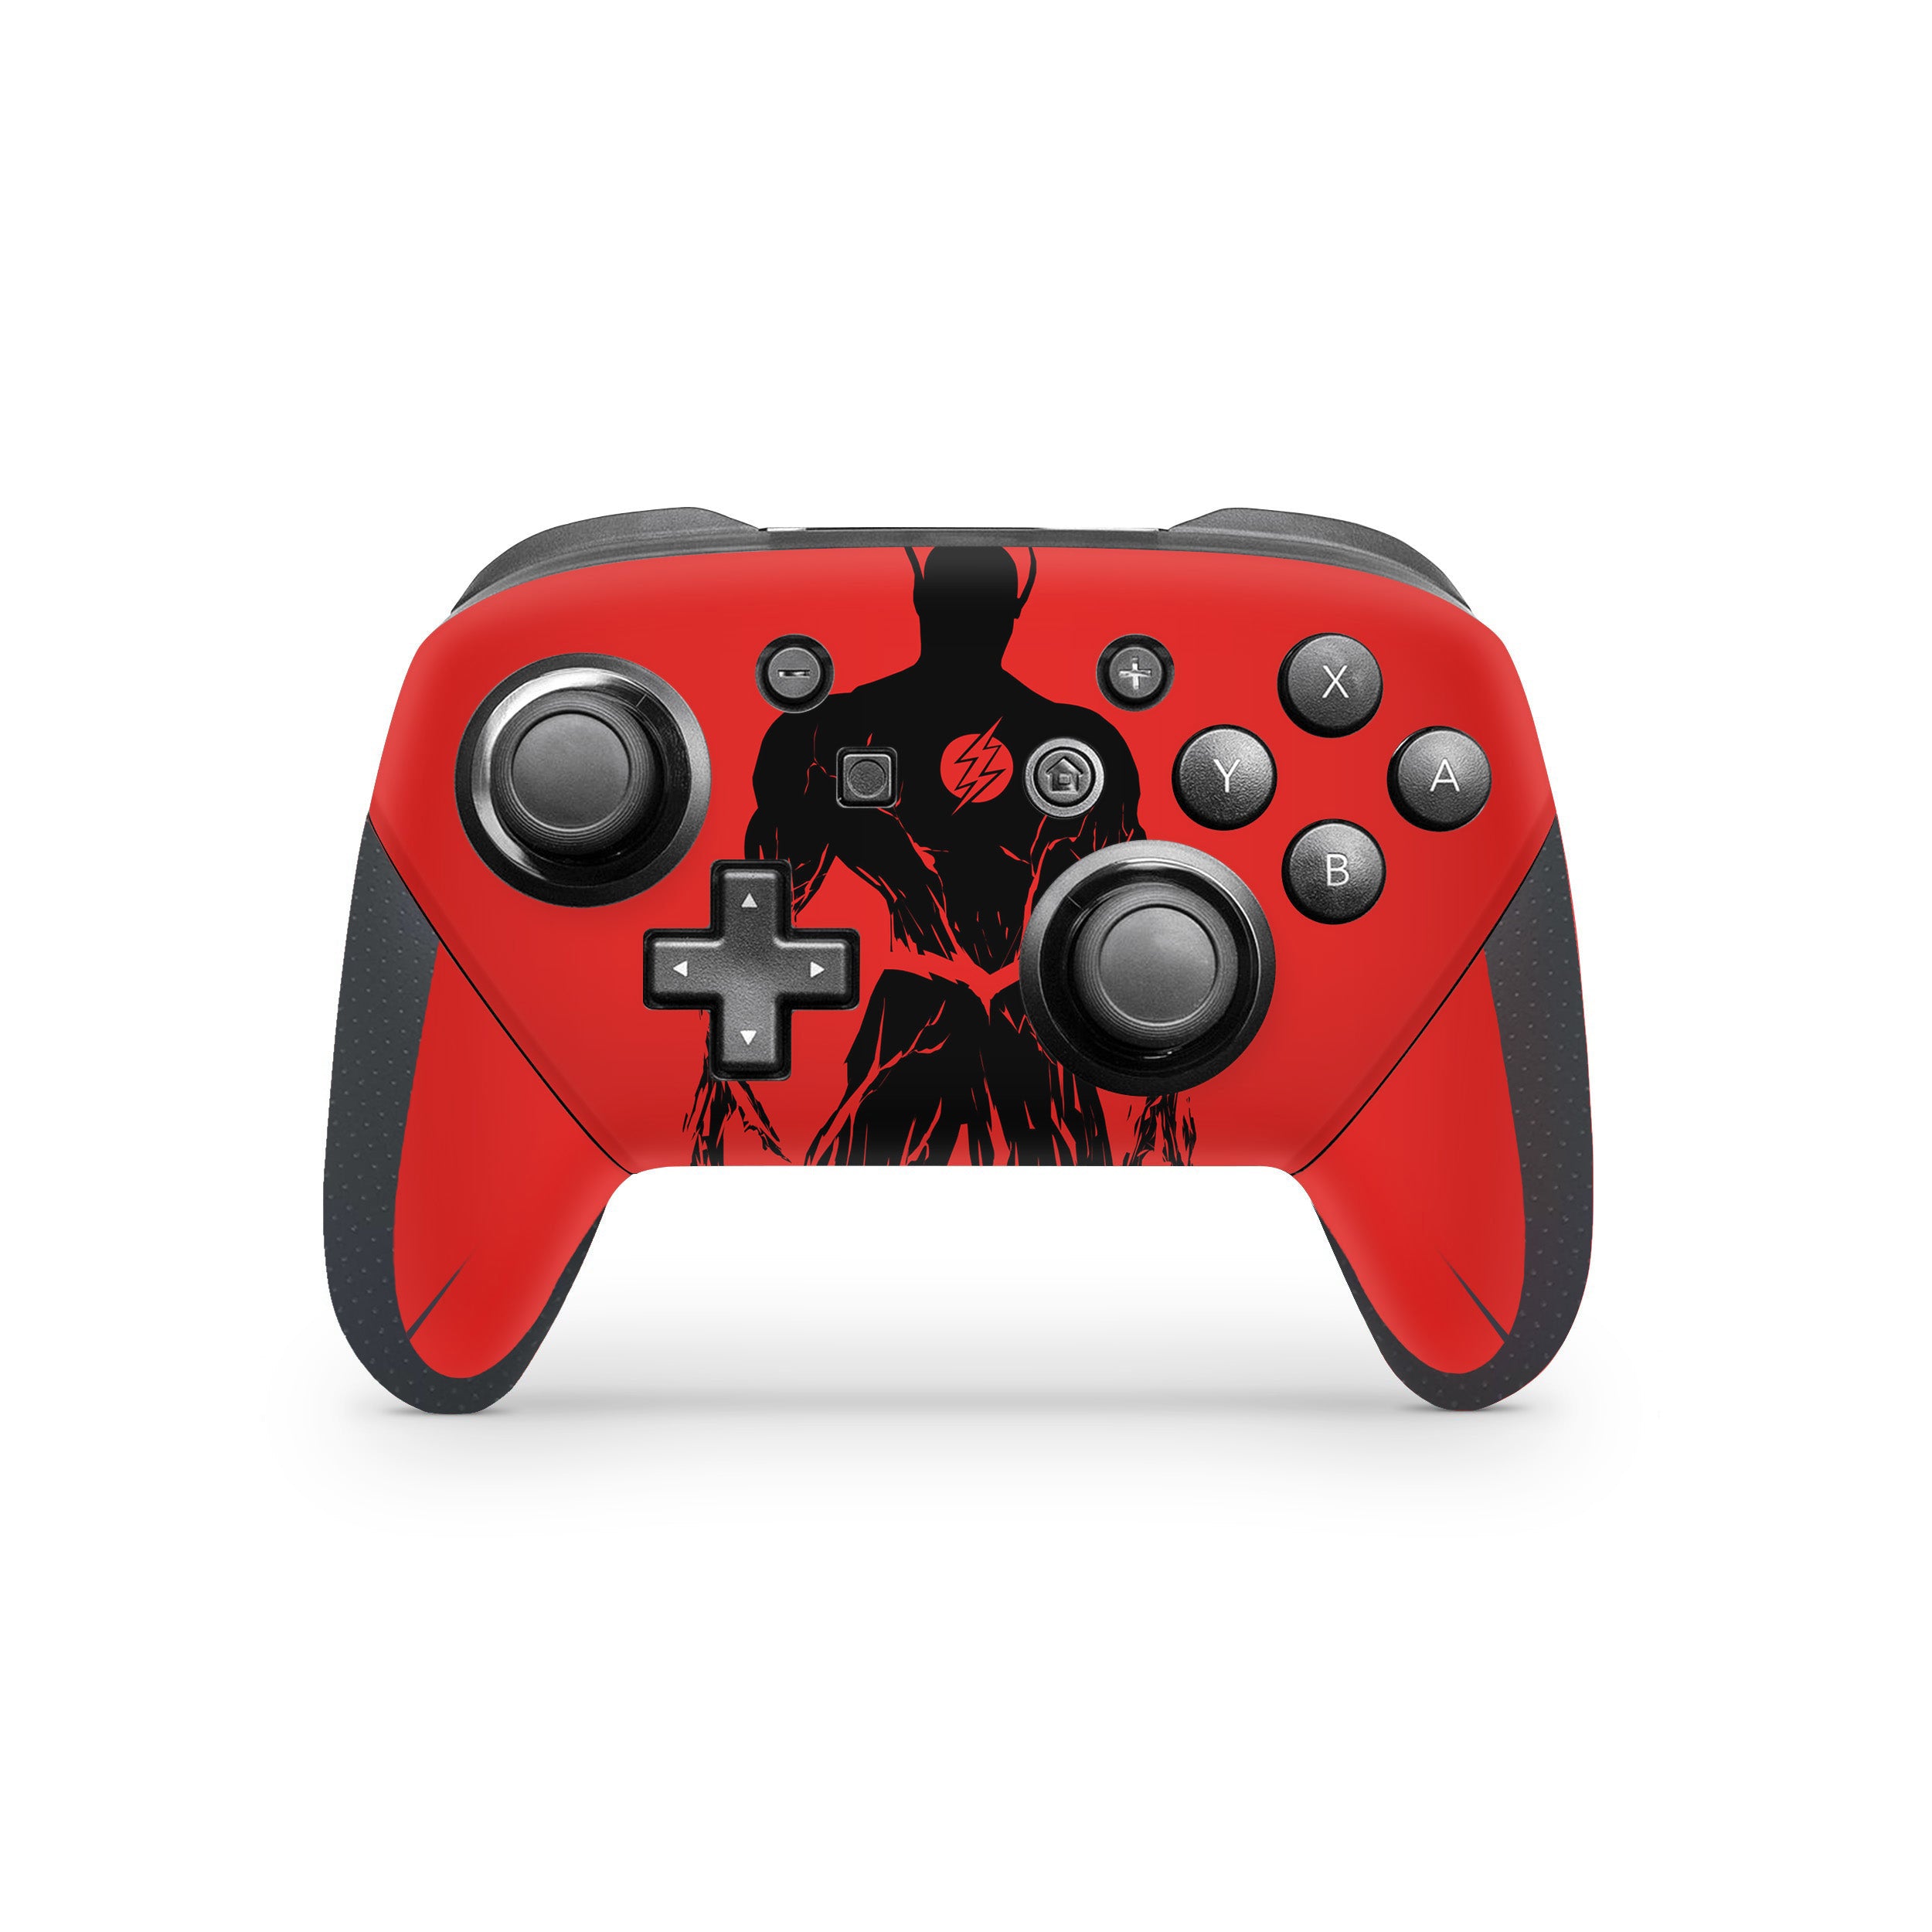 A video game skin featuring a DC Comics Flash design for the Switch Pro Controller.